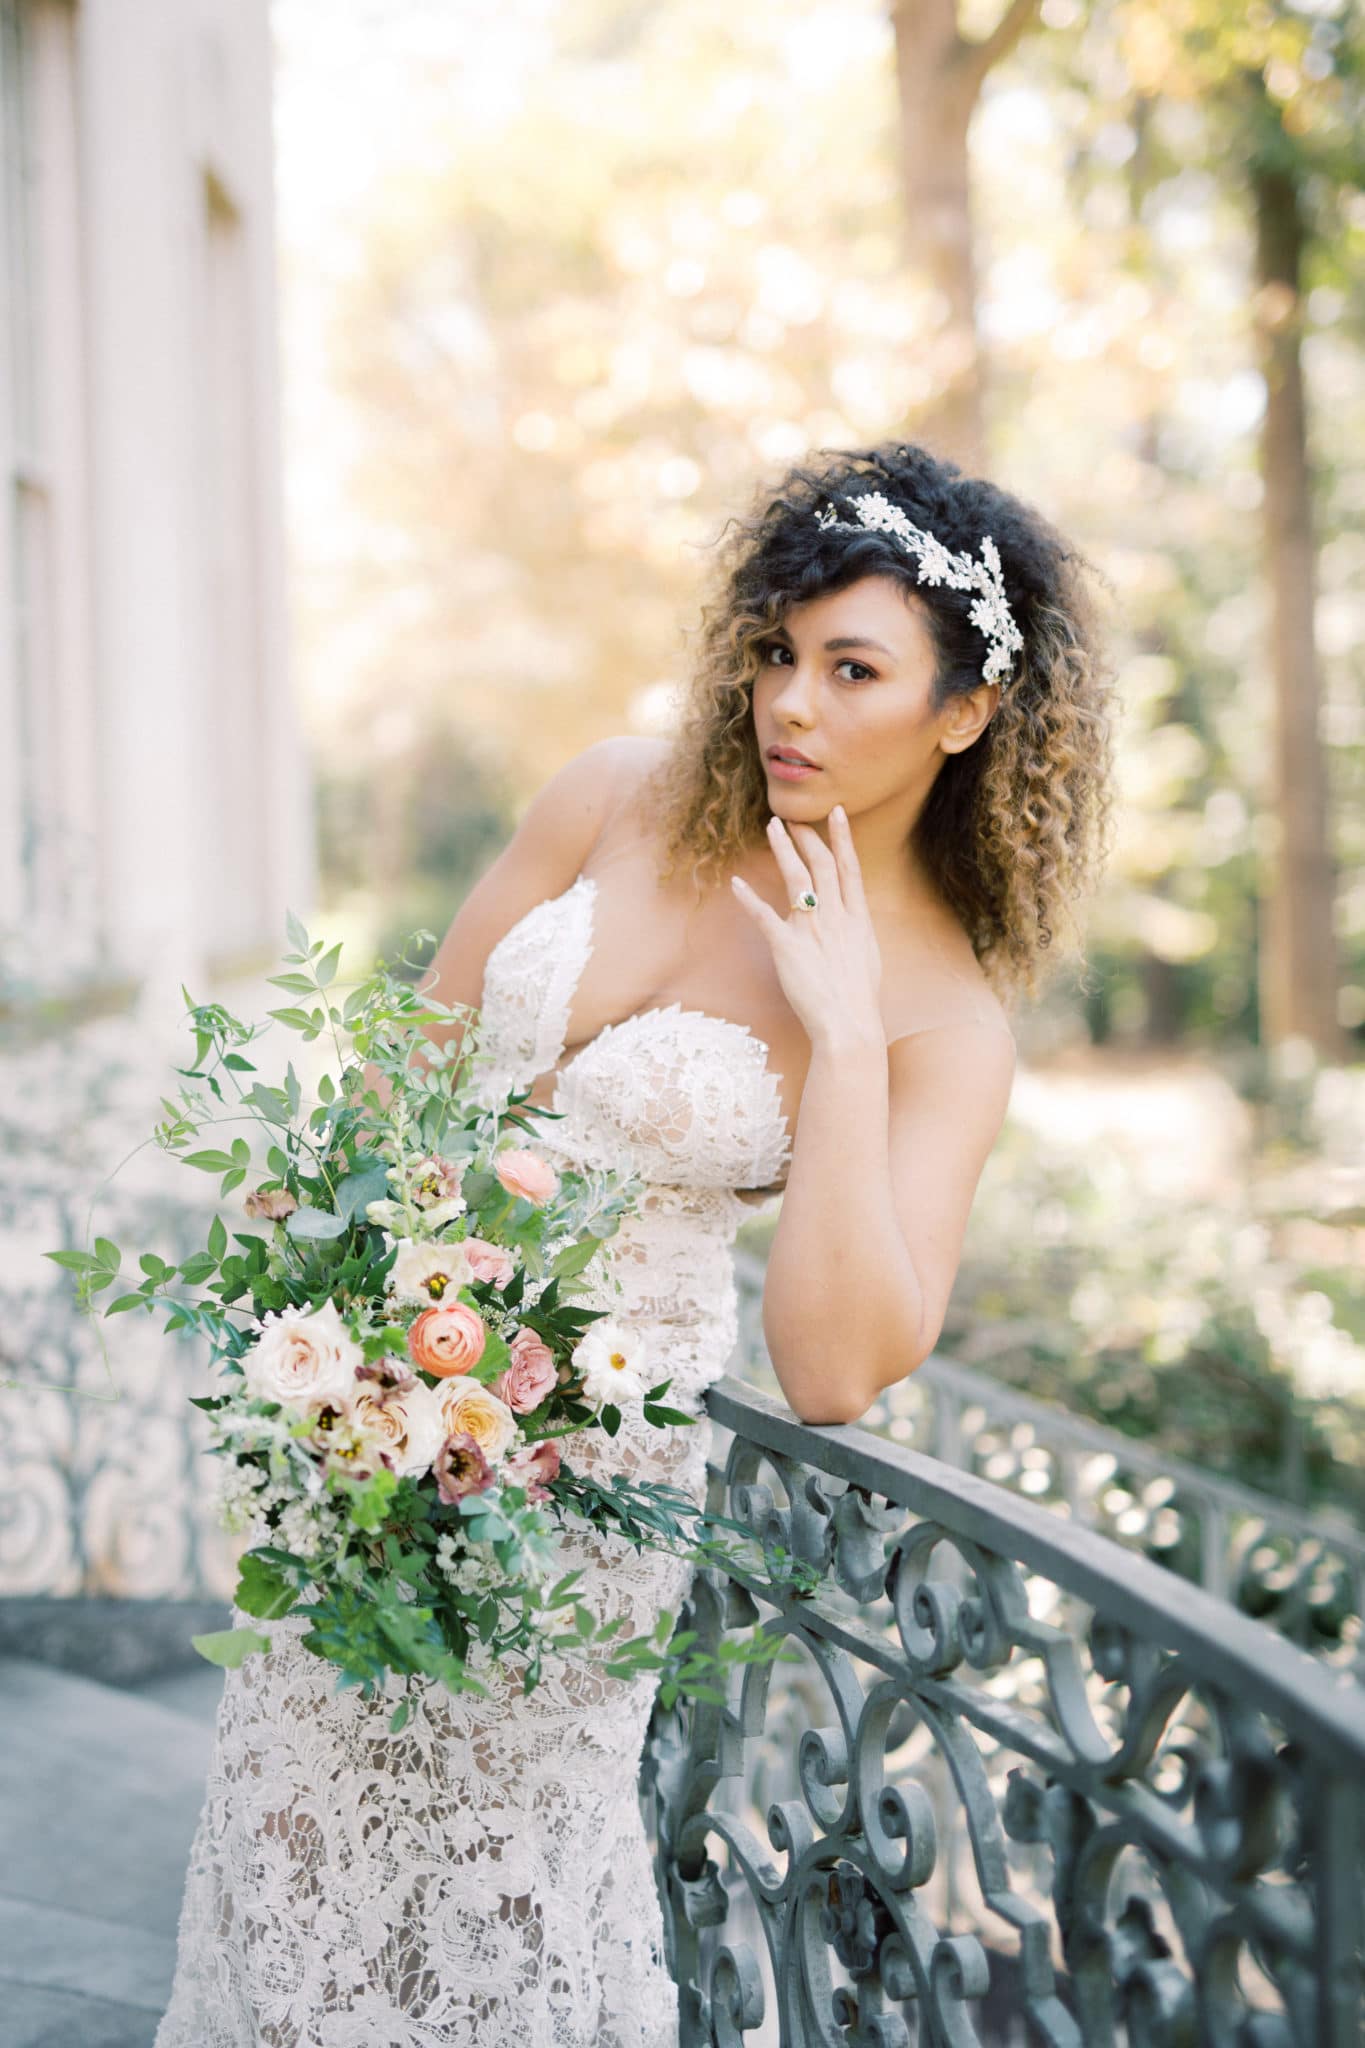 Beautiful Bride Swan House Wedding at Atlanta History Center. Flowers by The Perfect Posey. Sarah Sunstrom Photography